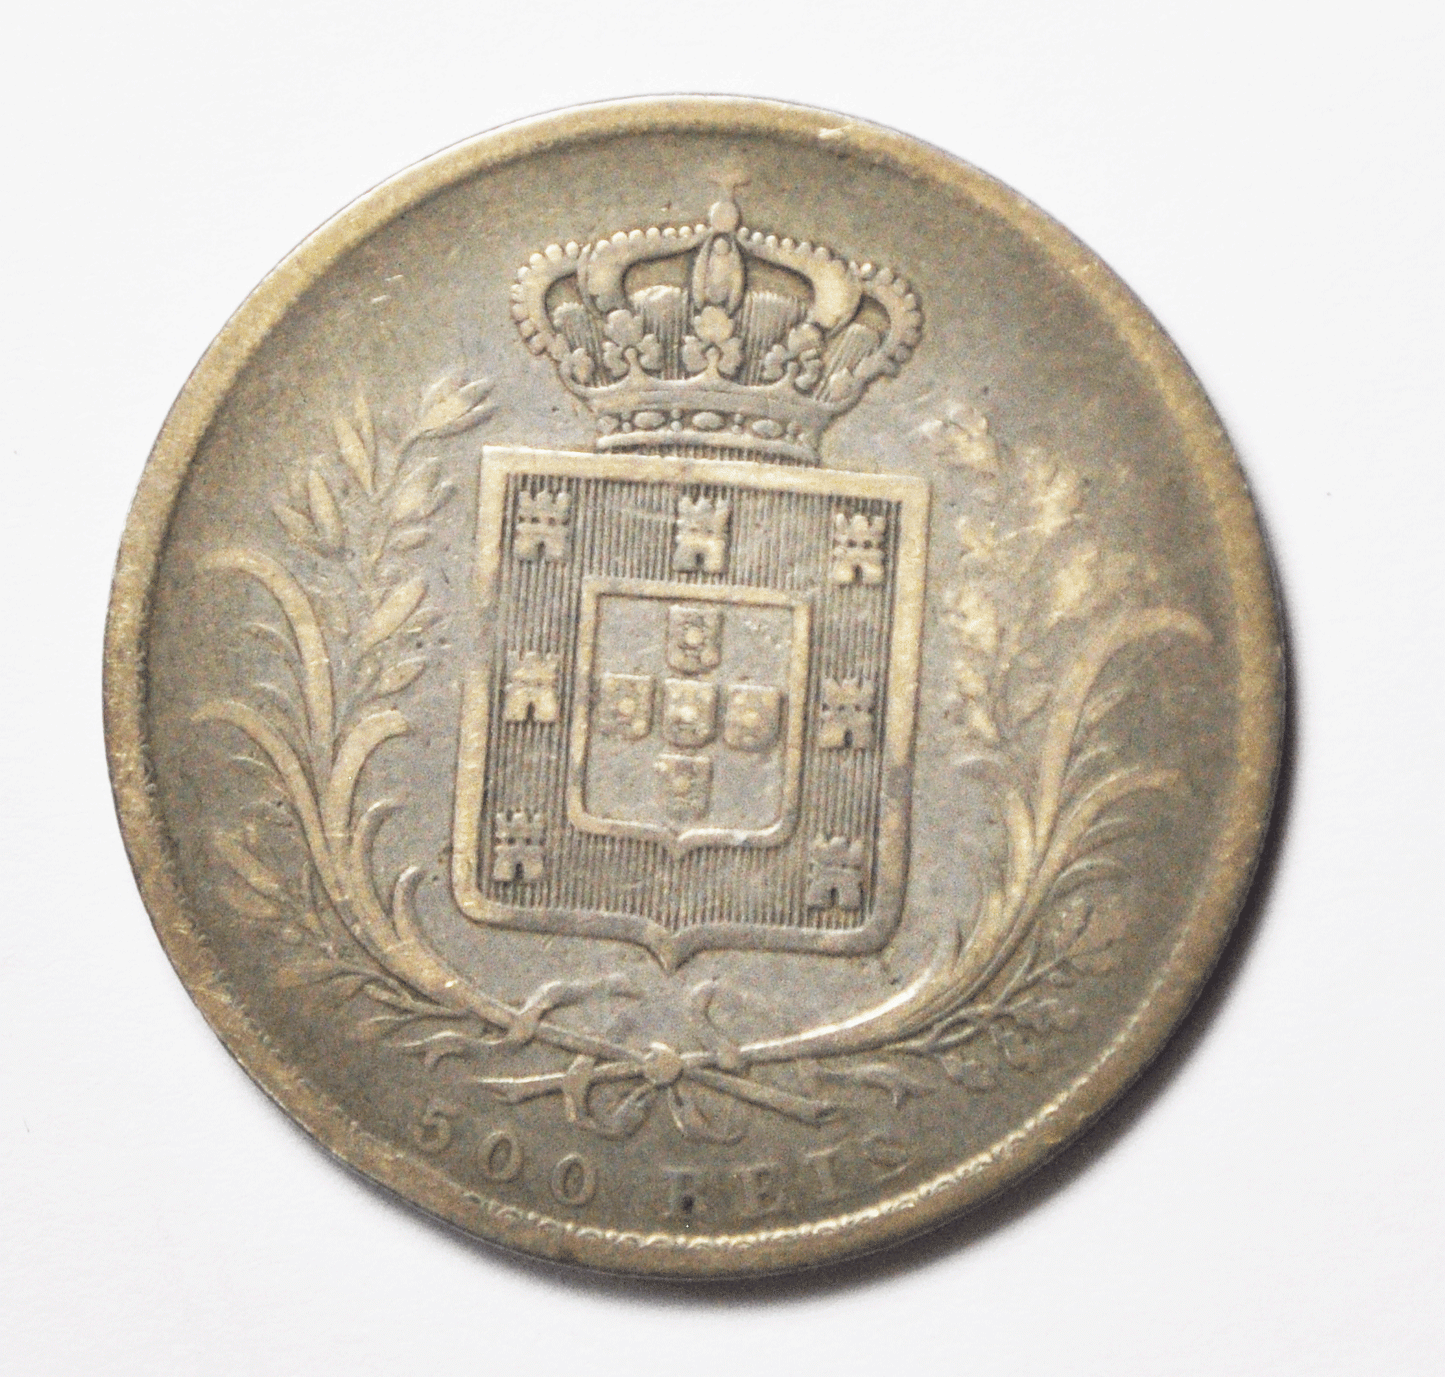 1864 Portugal 500 Reis Silver Coin Rare Low Mintage KM#509